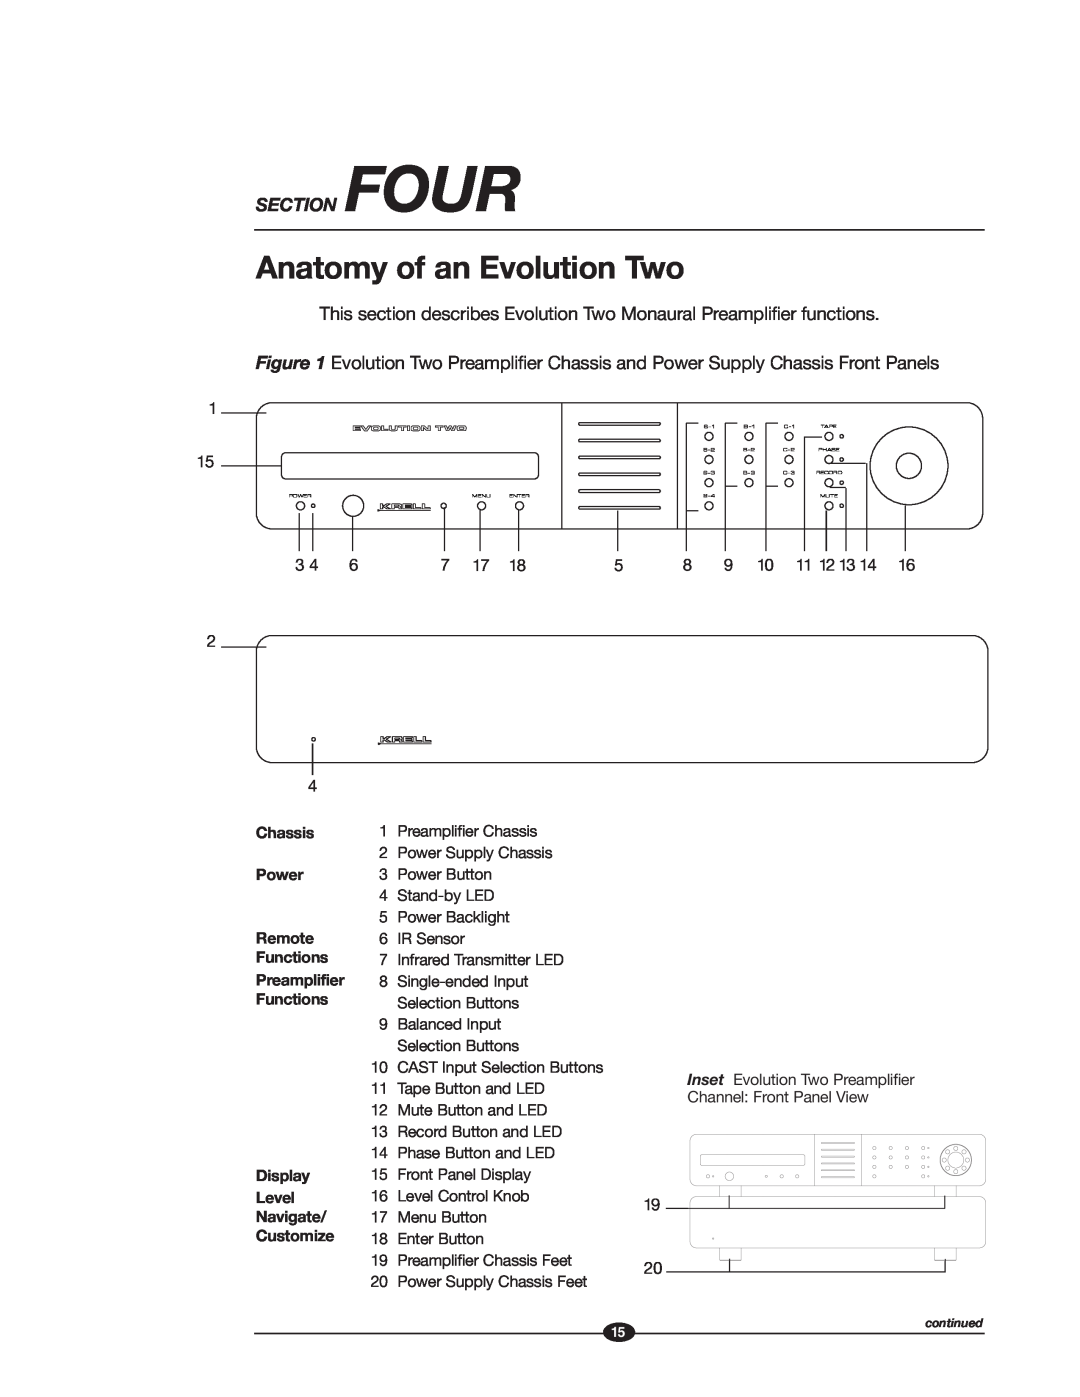 Krell Industries EVOLUTION TWO MONAURAL PREAMPLIFIER manual Anatomy of an Evolution Two, Section Four 